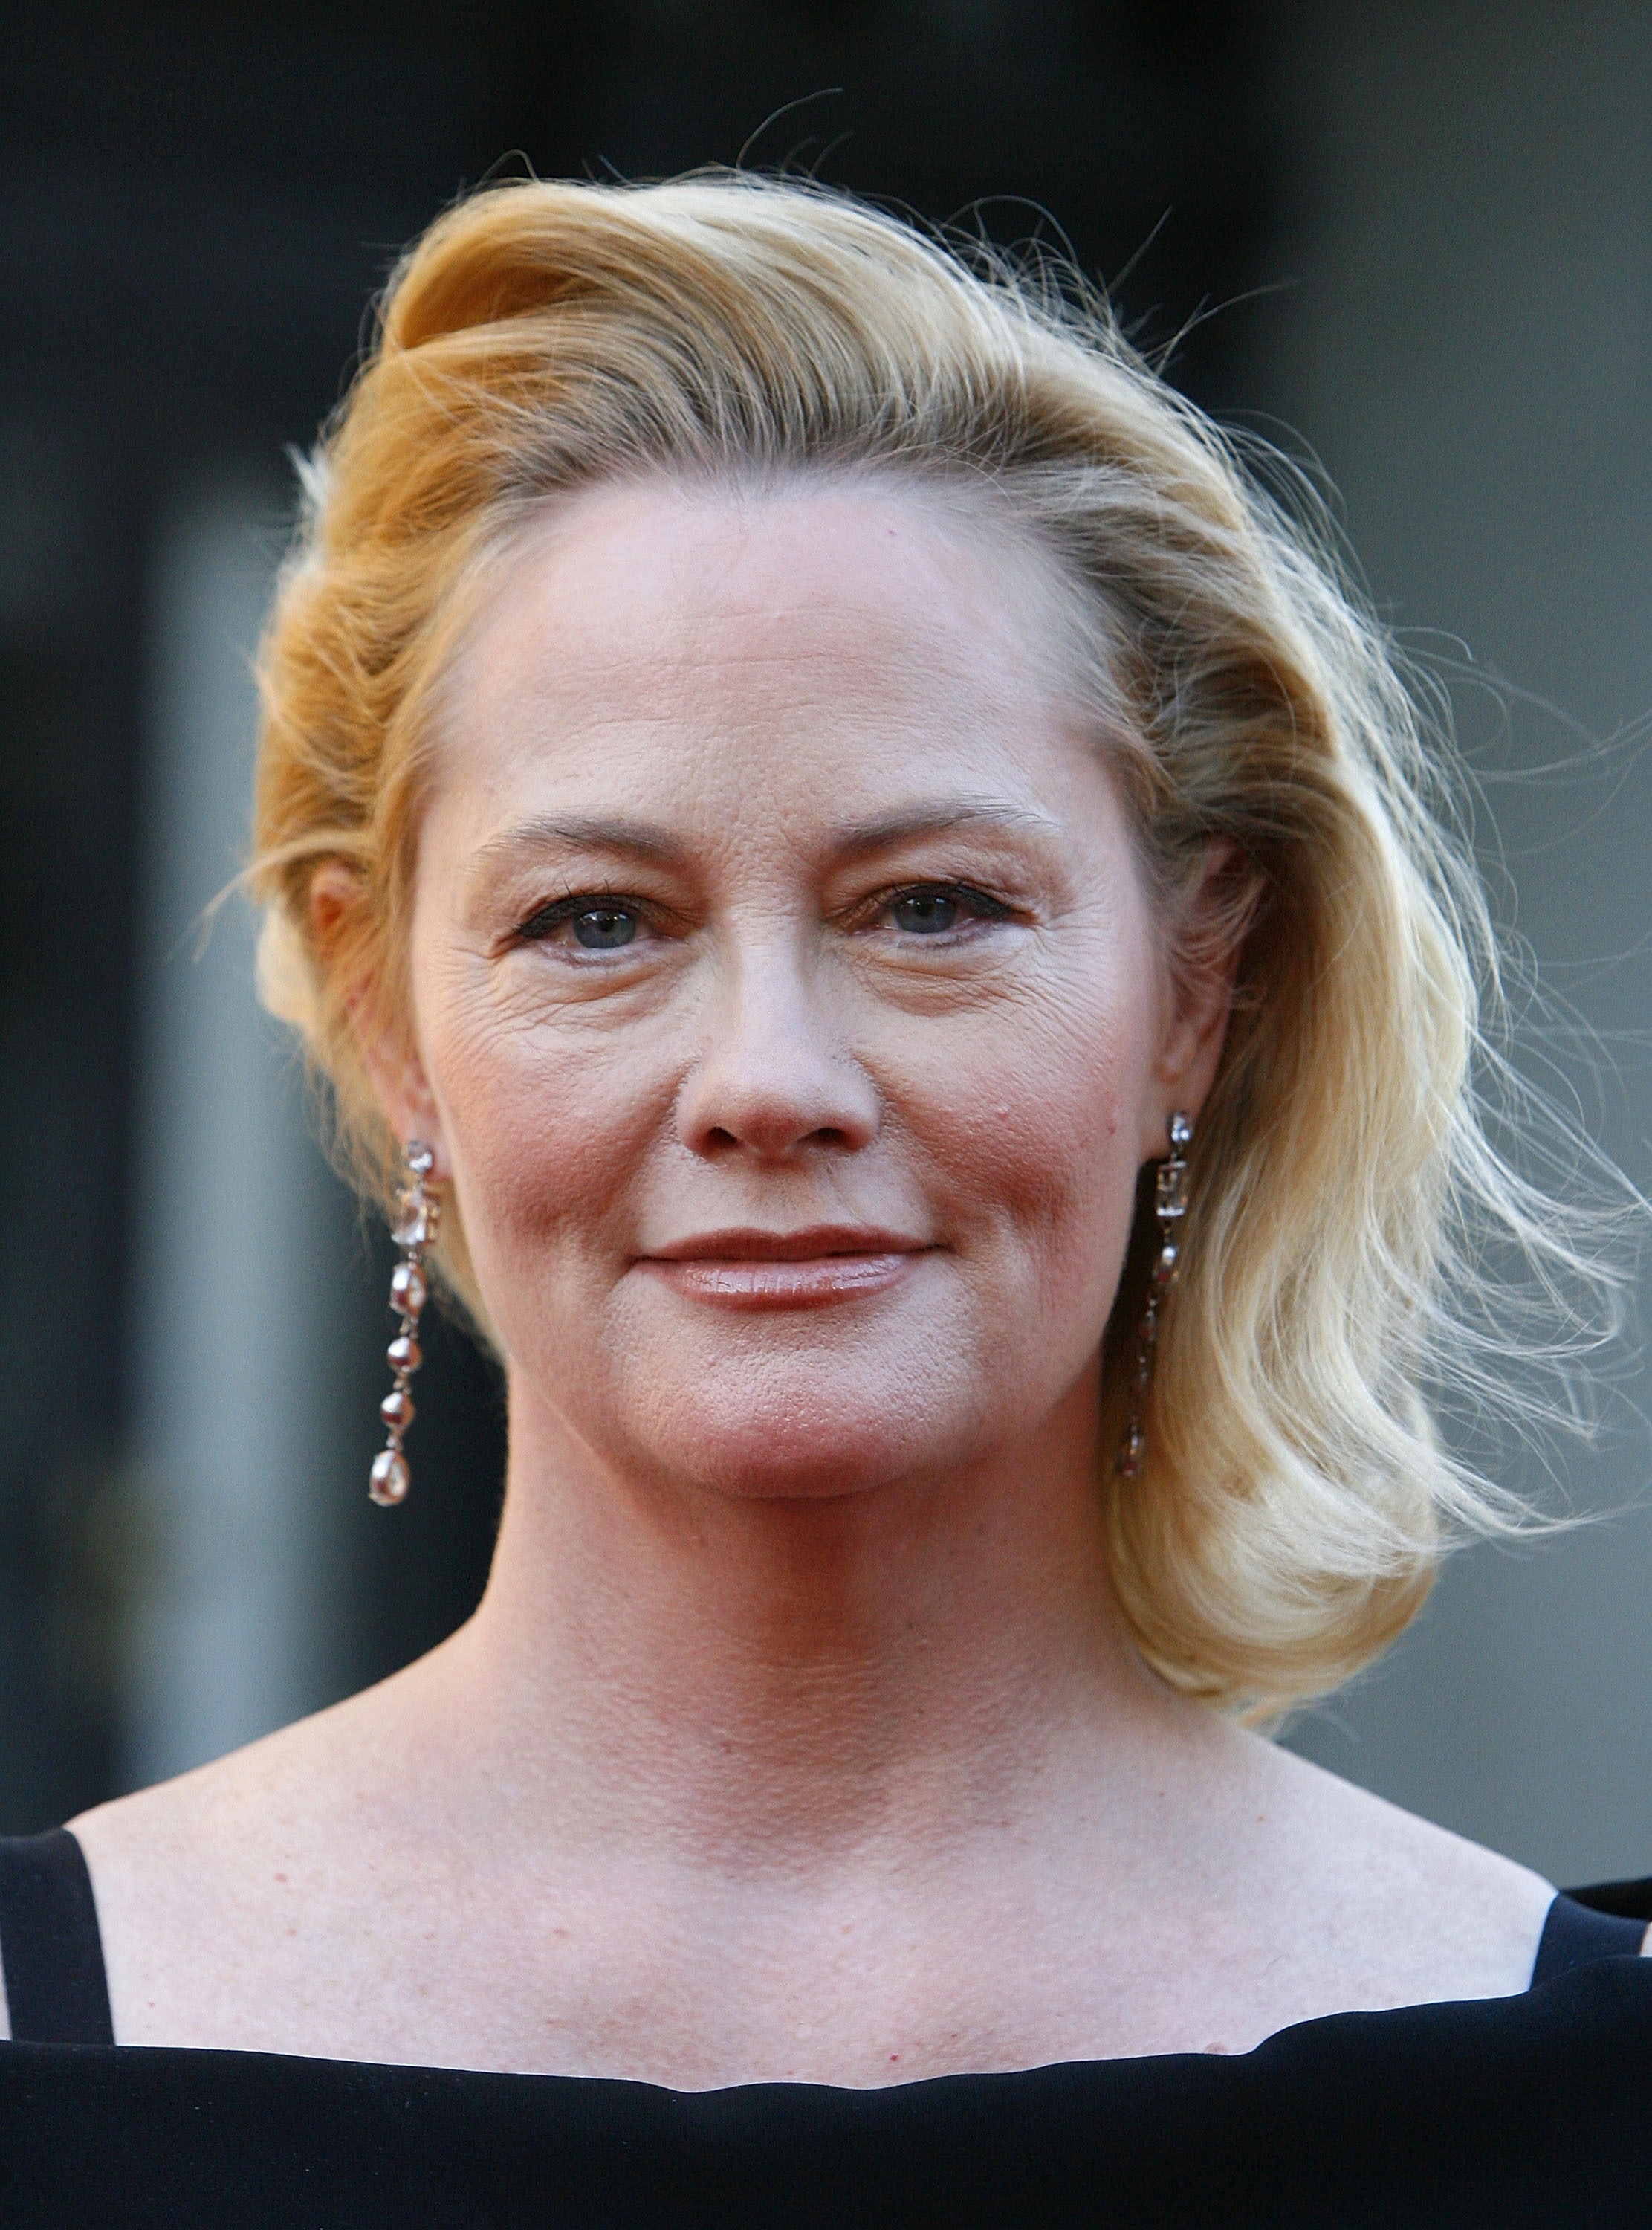 Cybill Shepherd at the world premiere of "Runnin' Down A Dream" on October 2, 2007, in Burbank, California. | Source: Getty Images